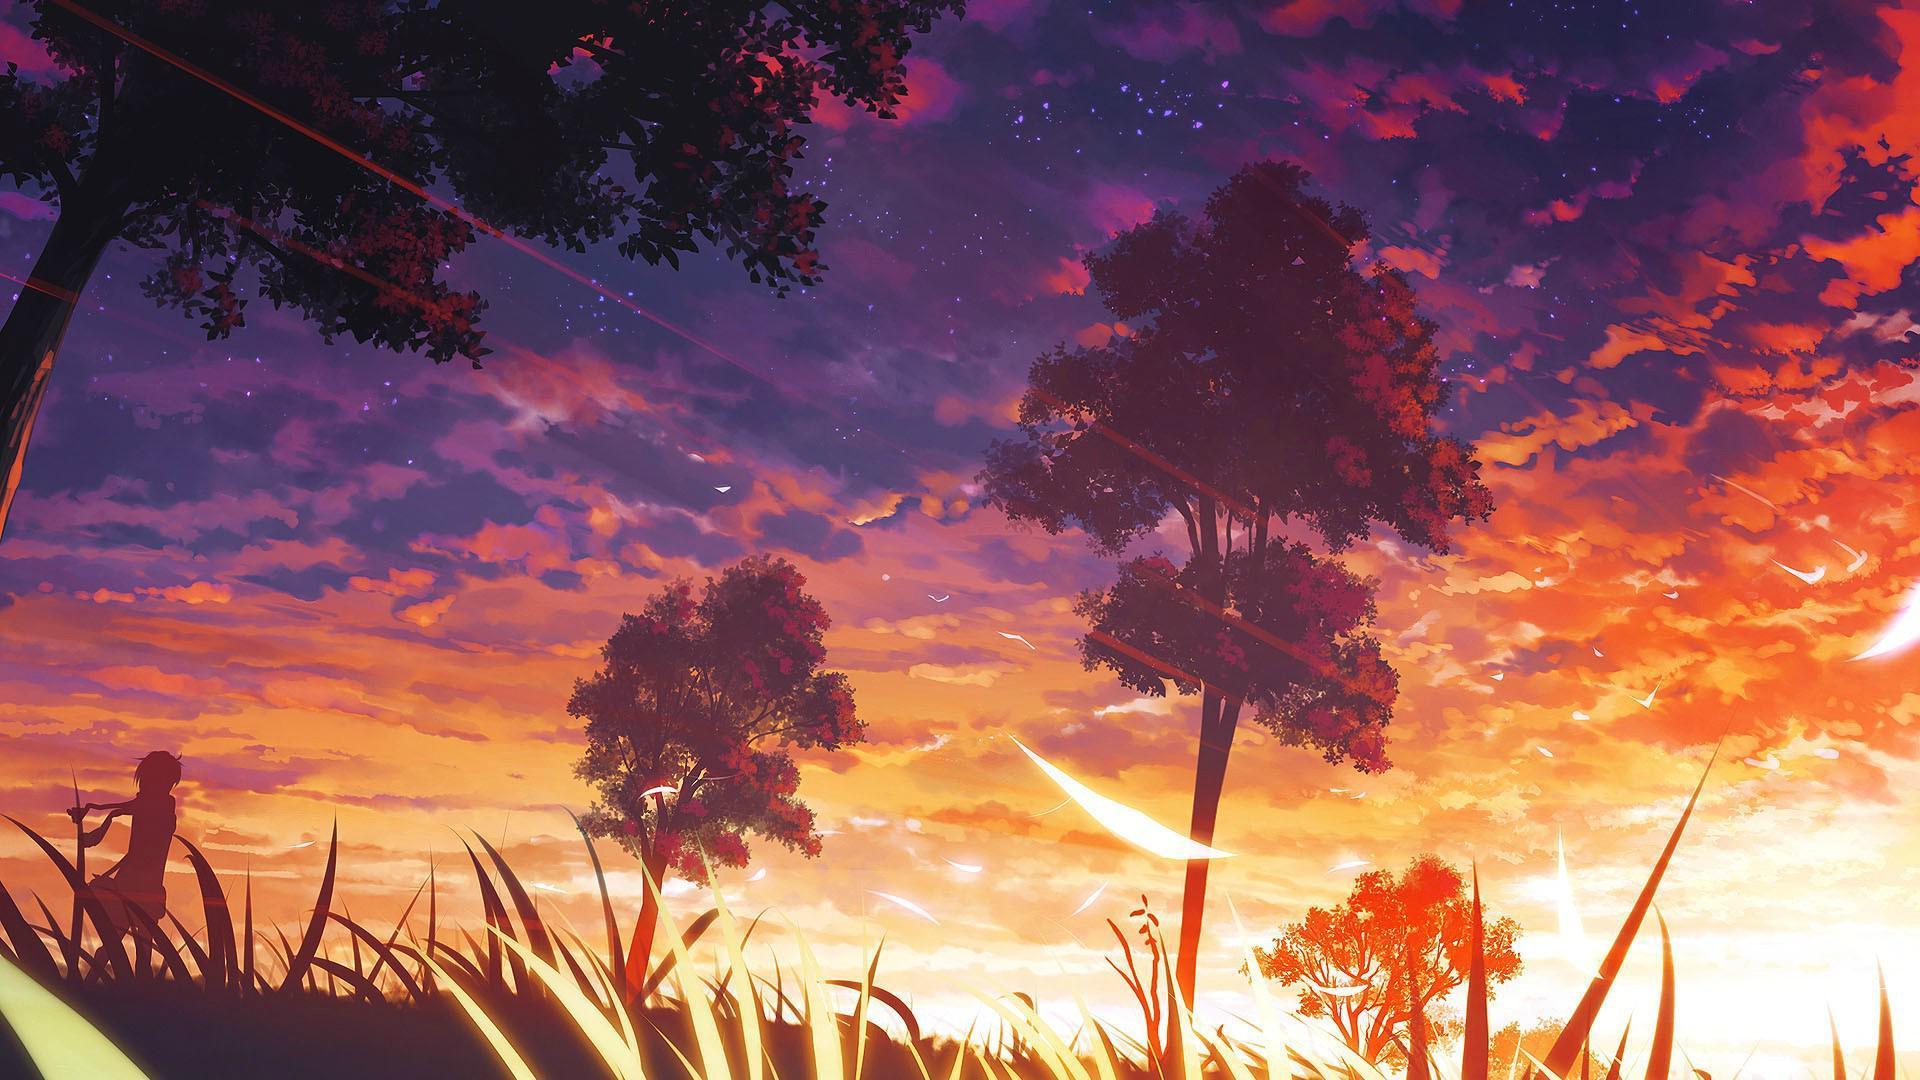 Anime Sunset 1920x1080 Wallpapers - Wallpaper Cave